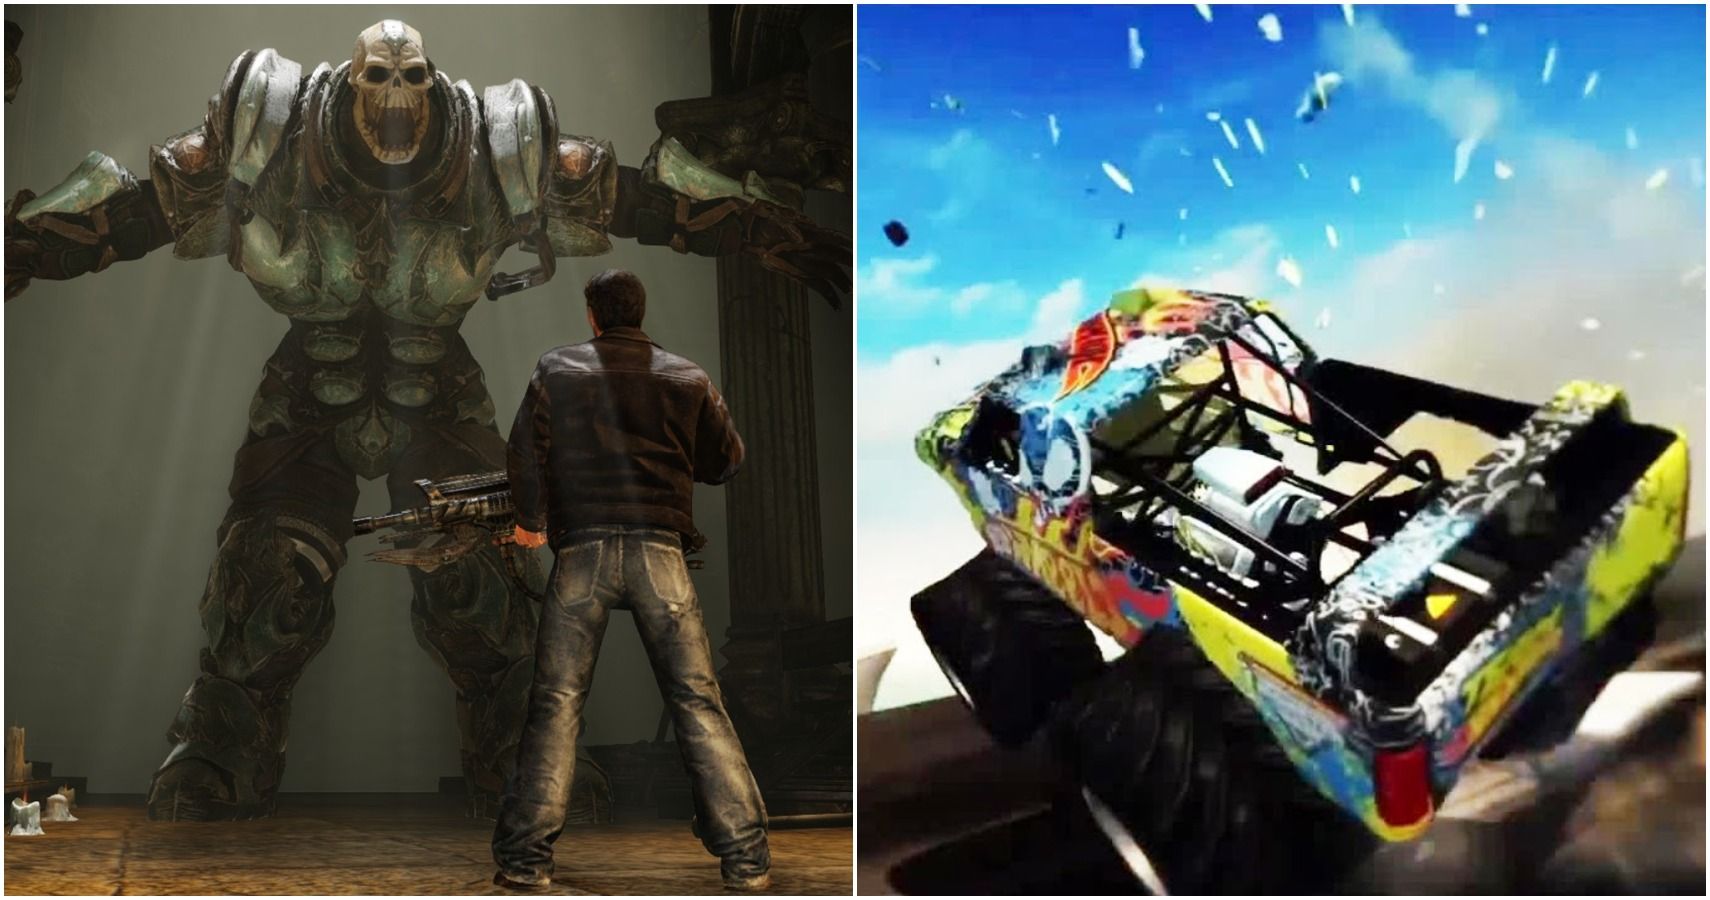 The 25 Worst Video Games Of All Time, Ranked According To Metacritic